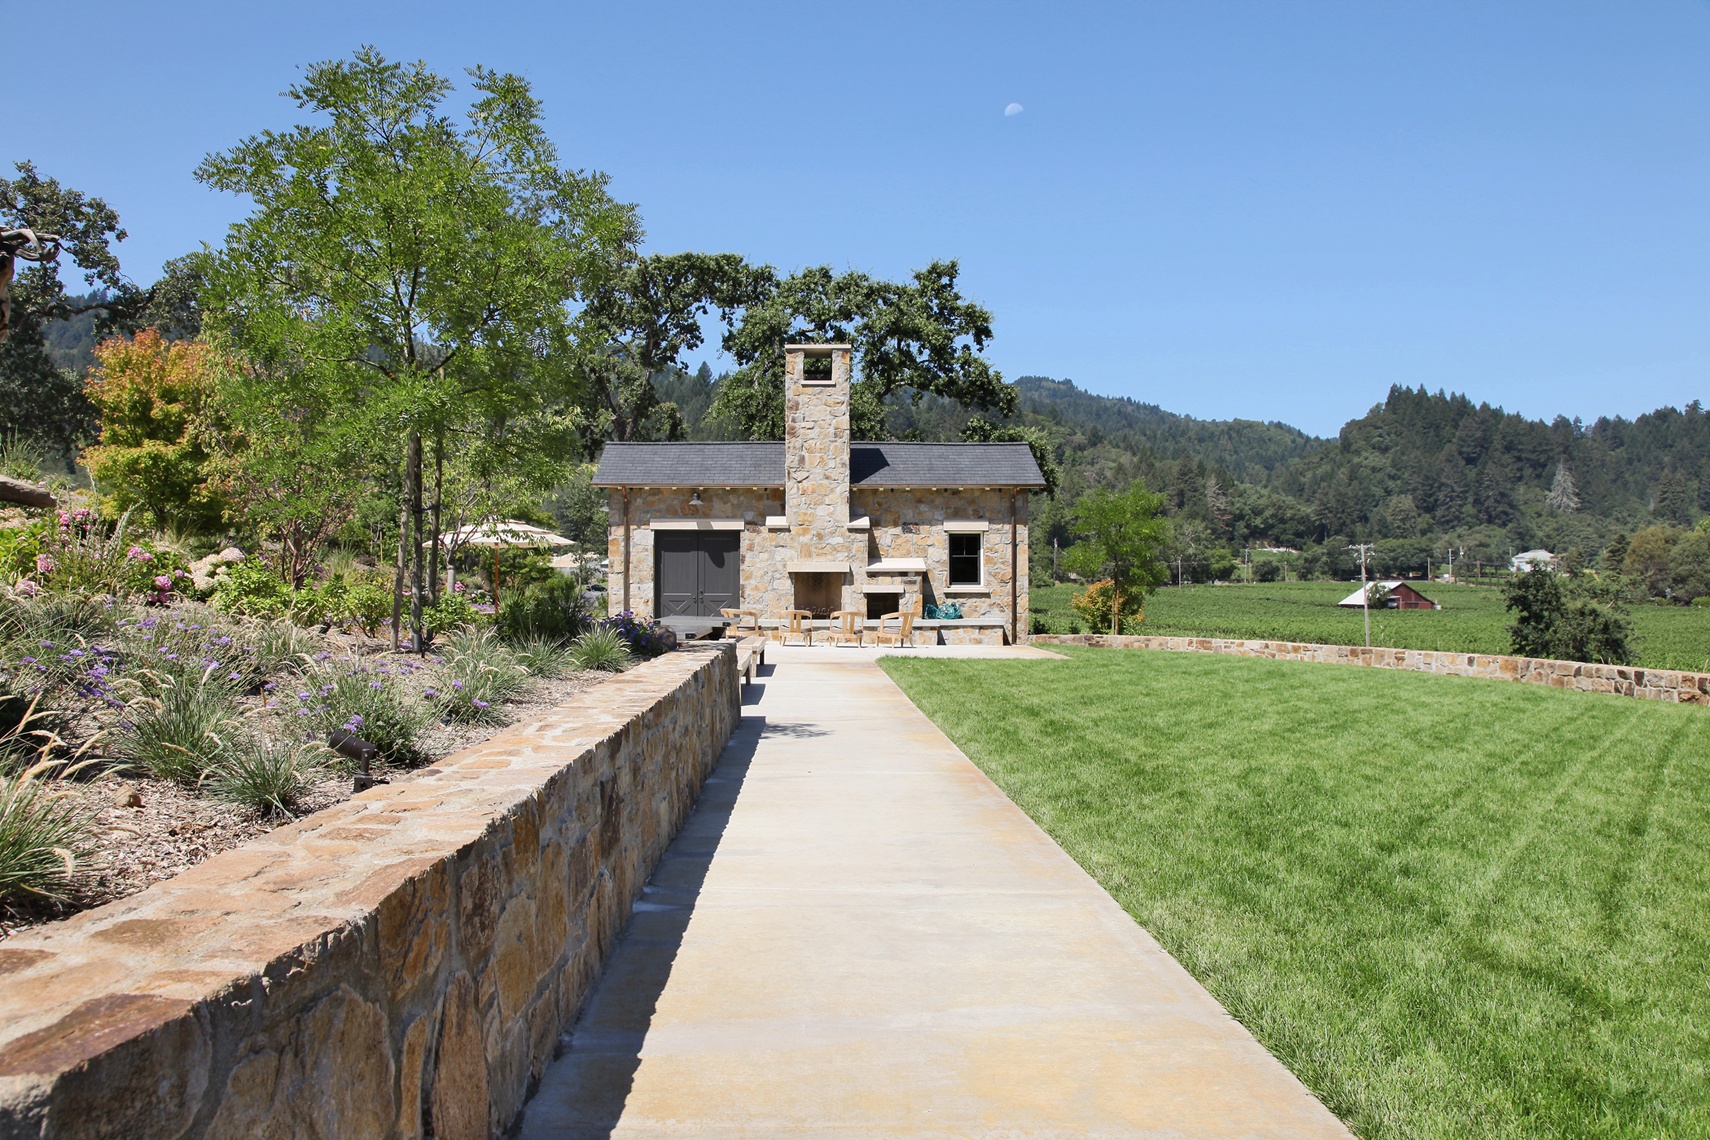 Trinchero Estate Tasting Room exterior renovation and remodel completed by FDC in Sonoma County